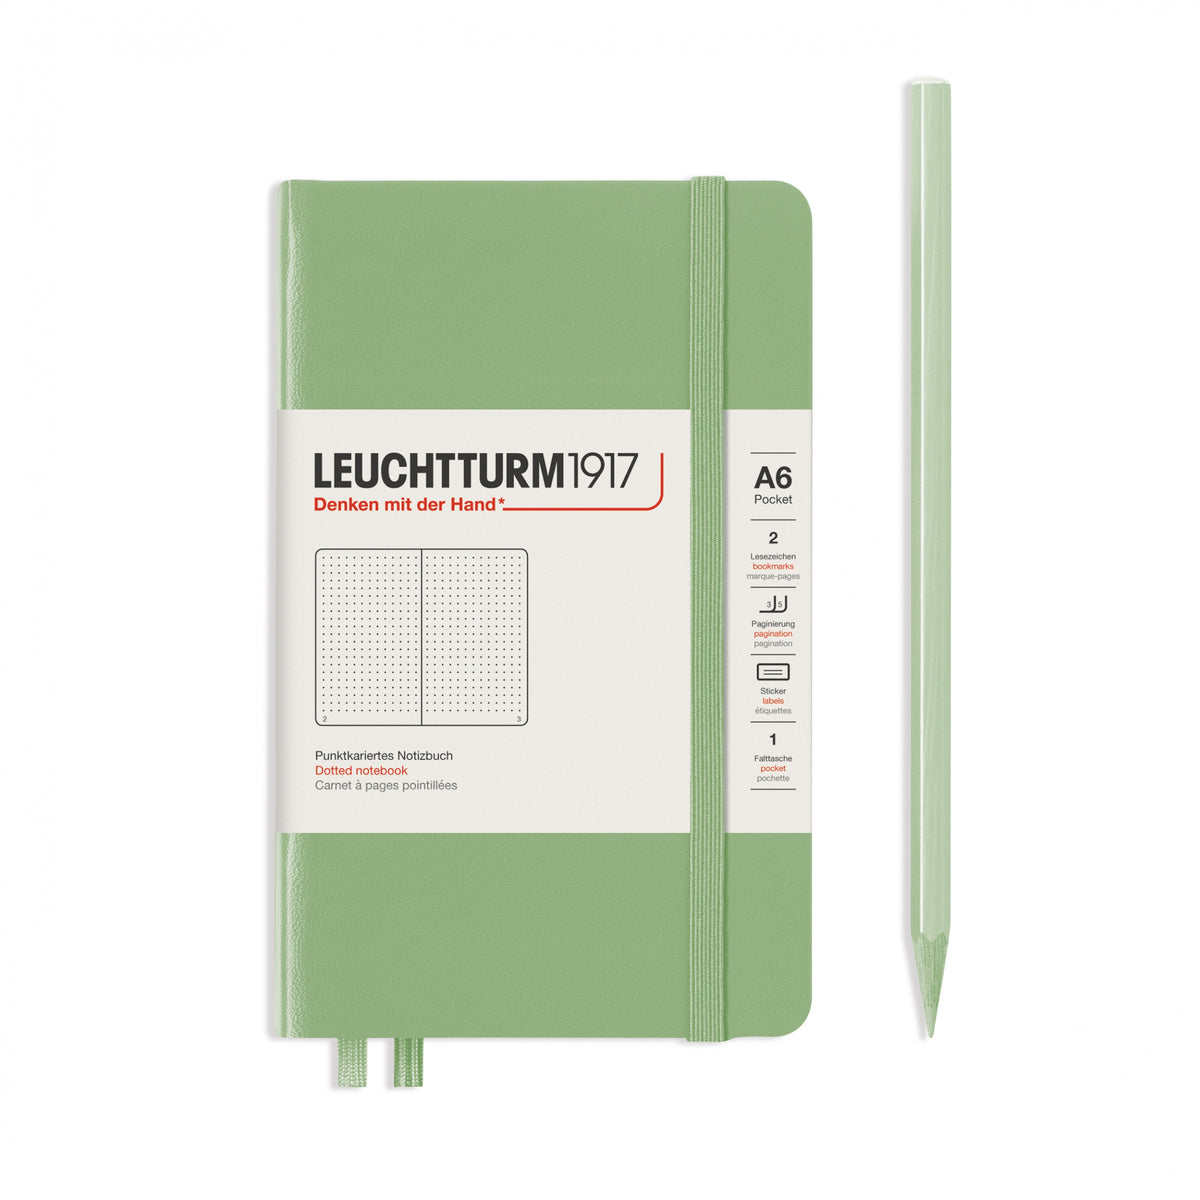 Leuchtturm1917 Notebook A6 Pocket Hardcover - Penny BlackLeuchtturm1917 Notebook A6 Pocket Hardcover in sage green and dotted ruling from penny black